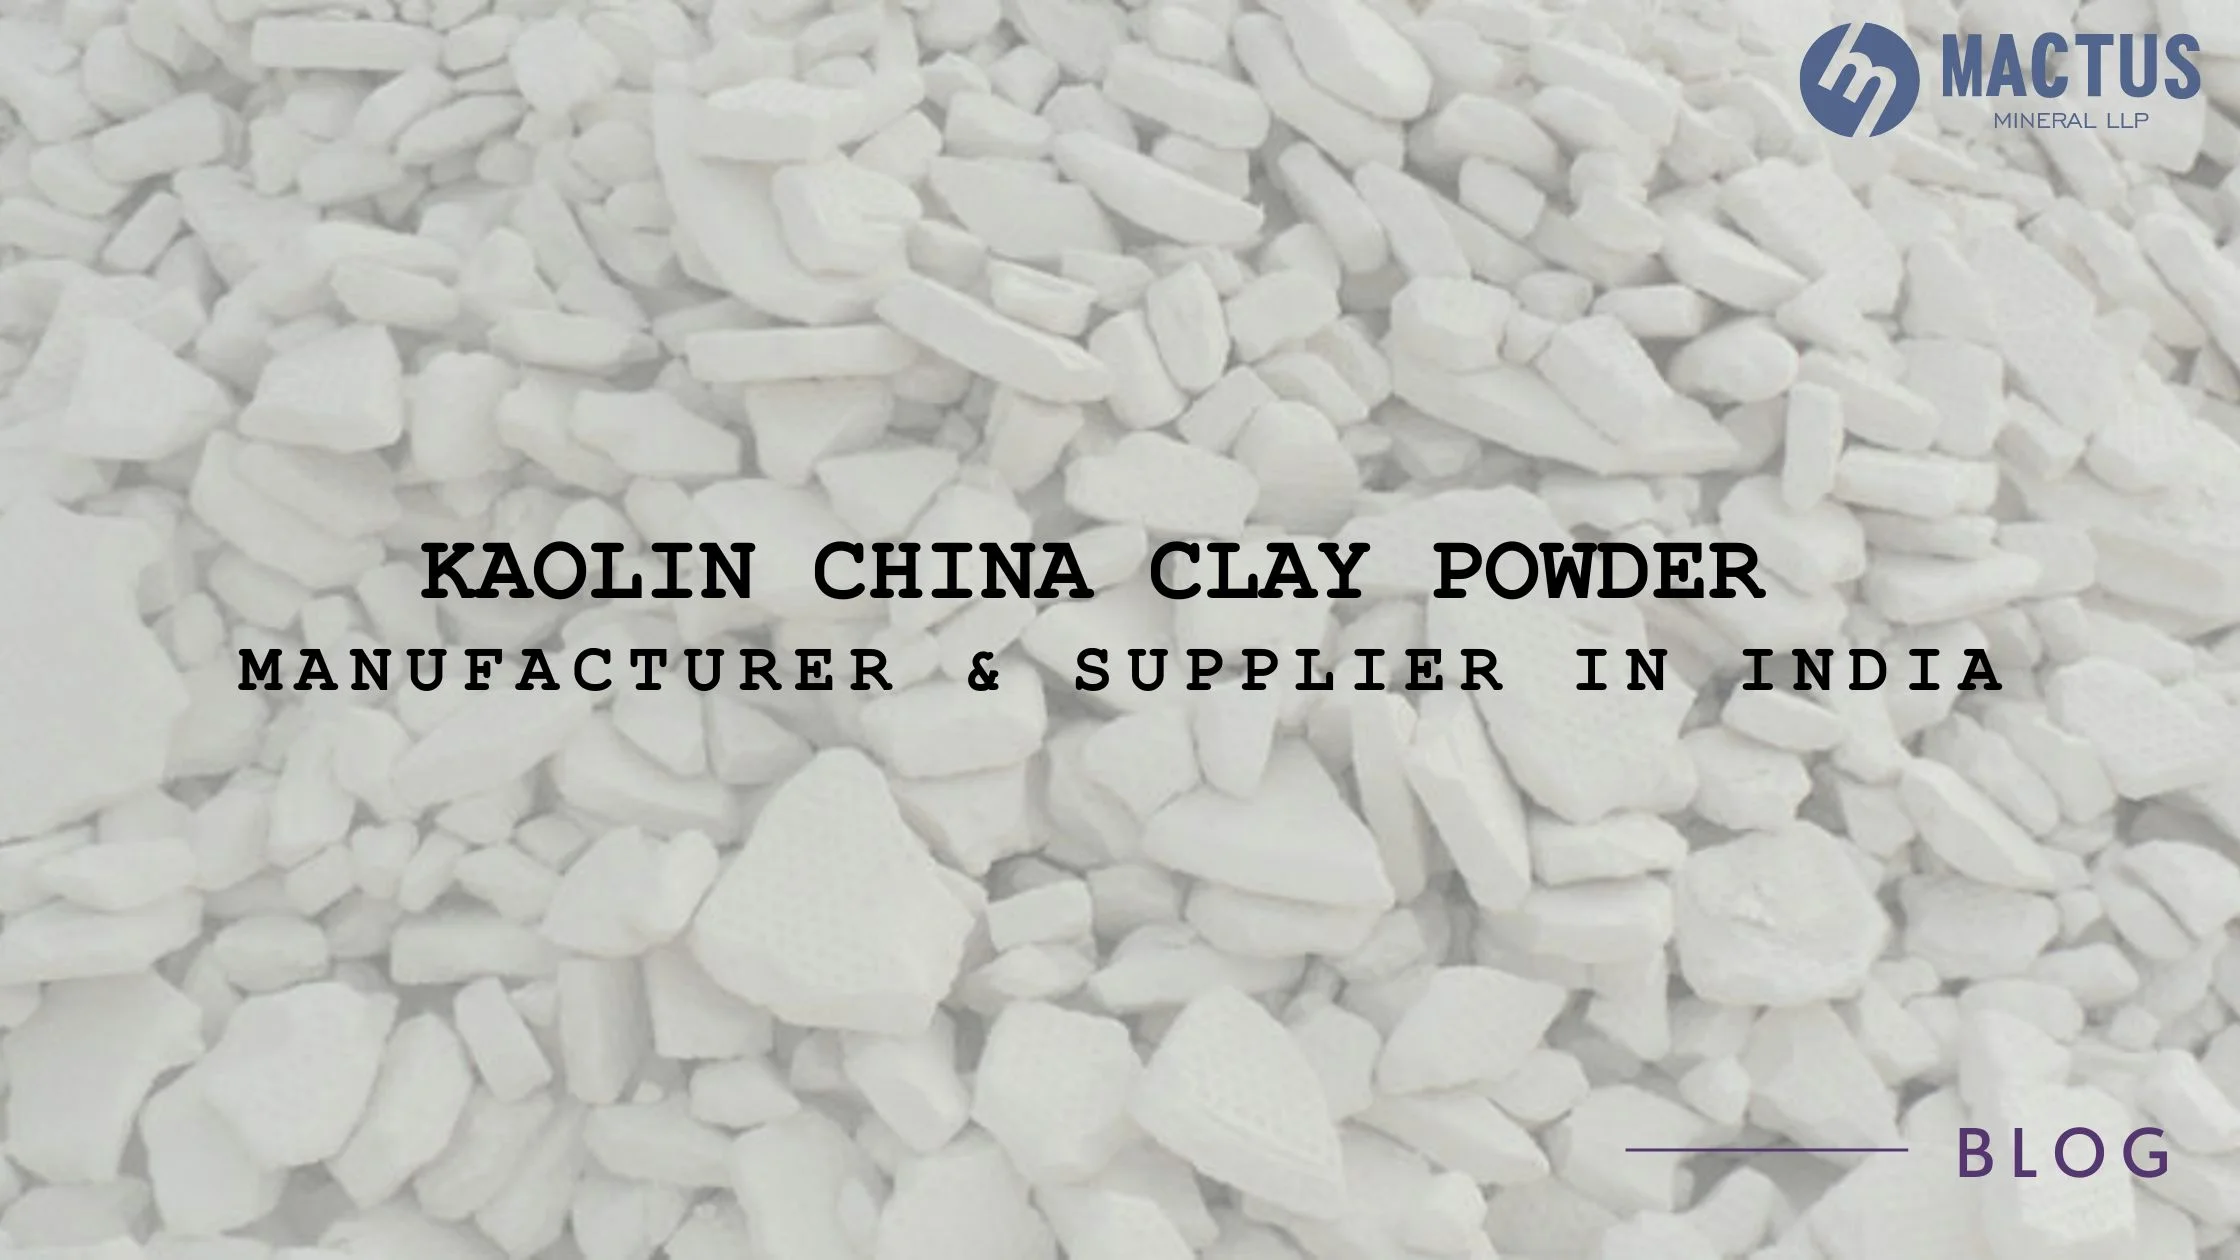 Kaolin China Clay Powder Manufacturer & Supplier in India